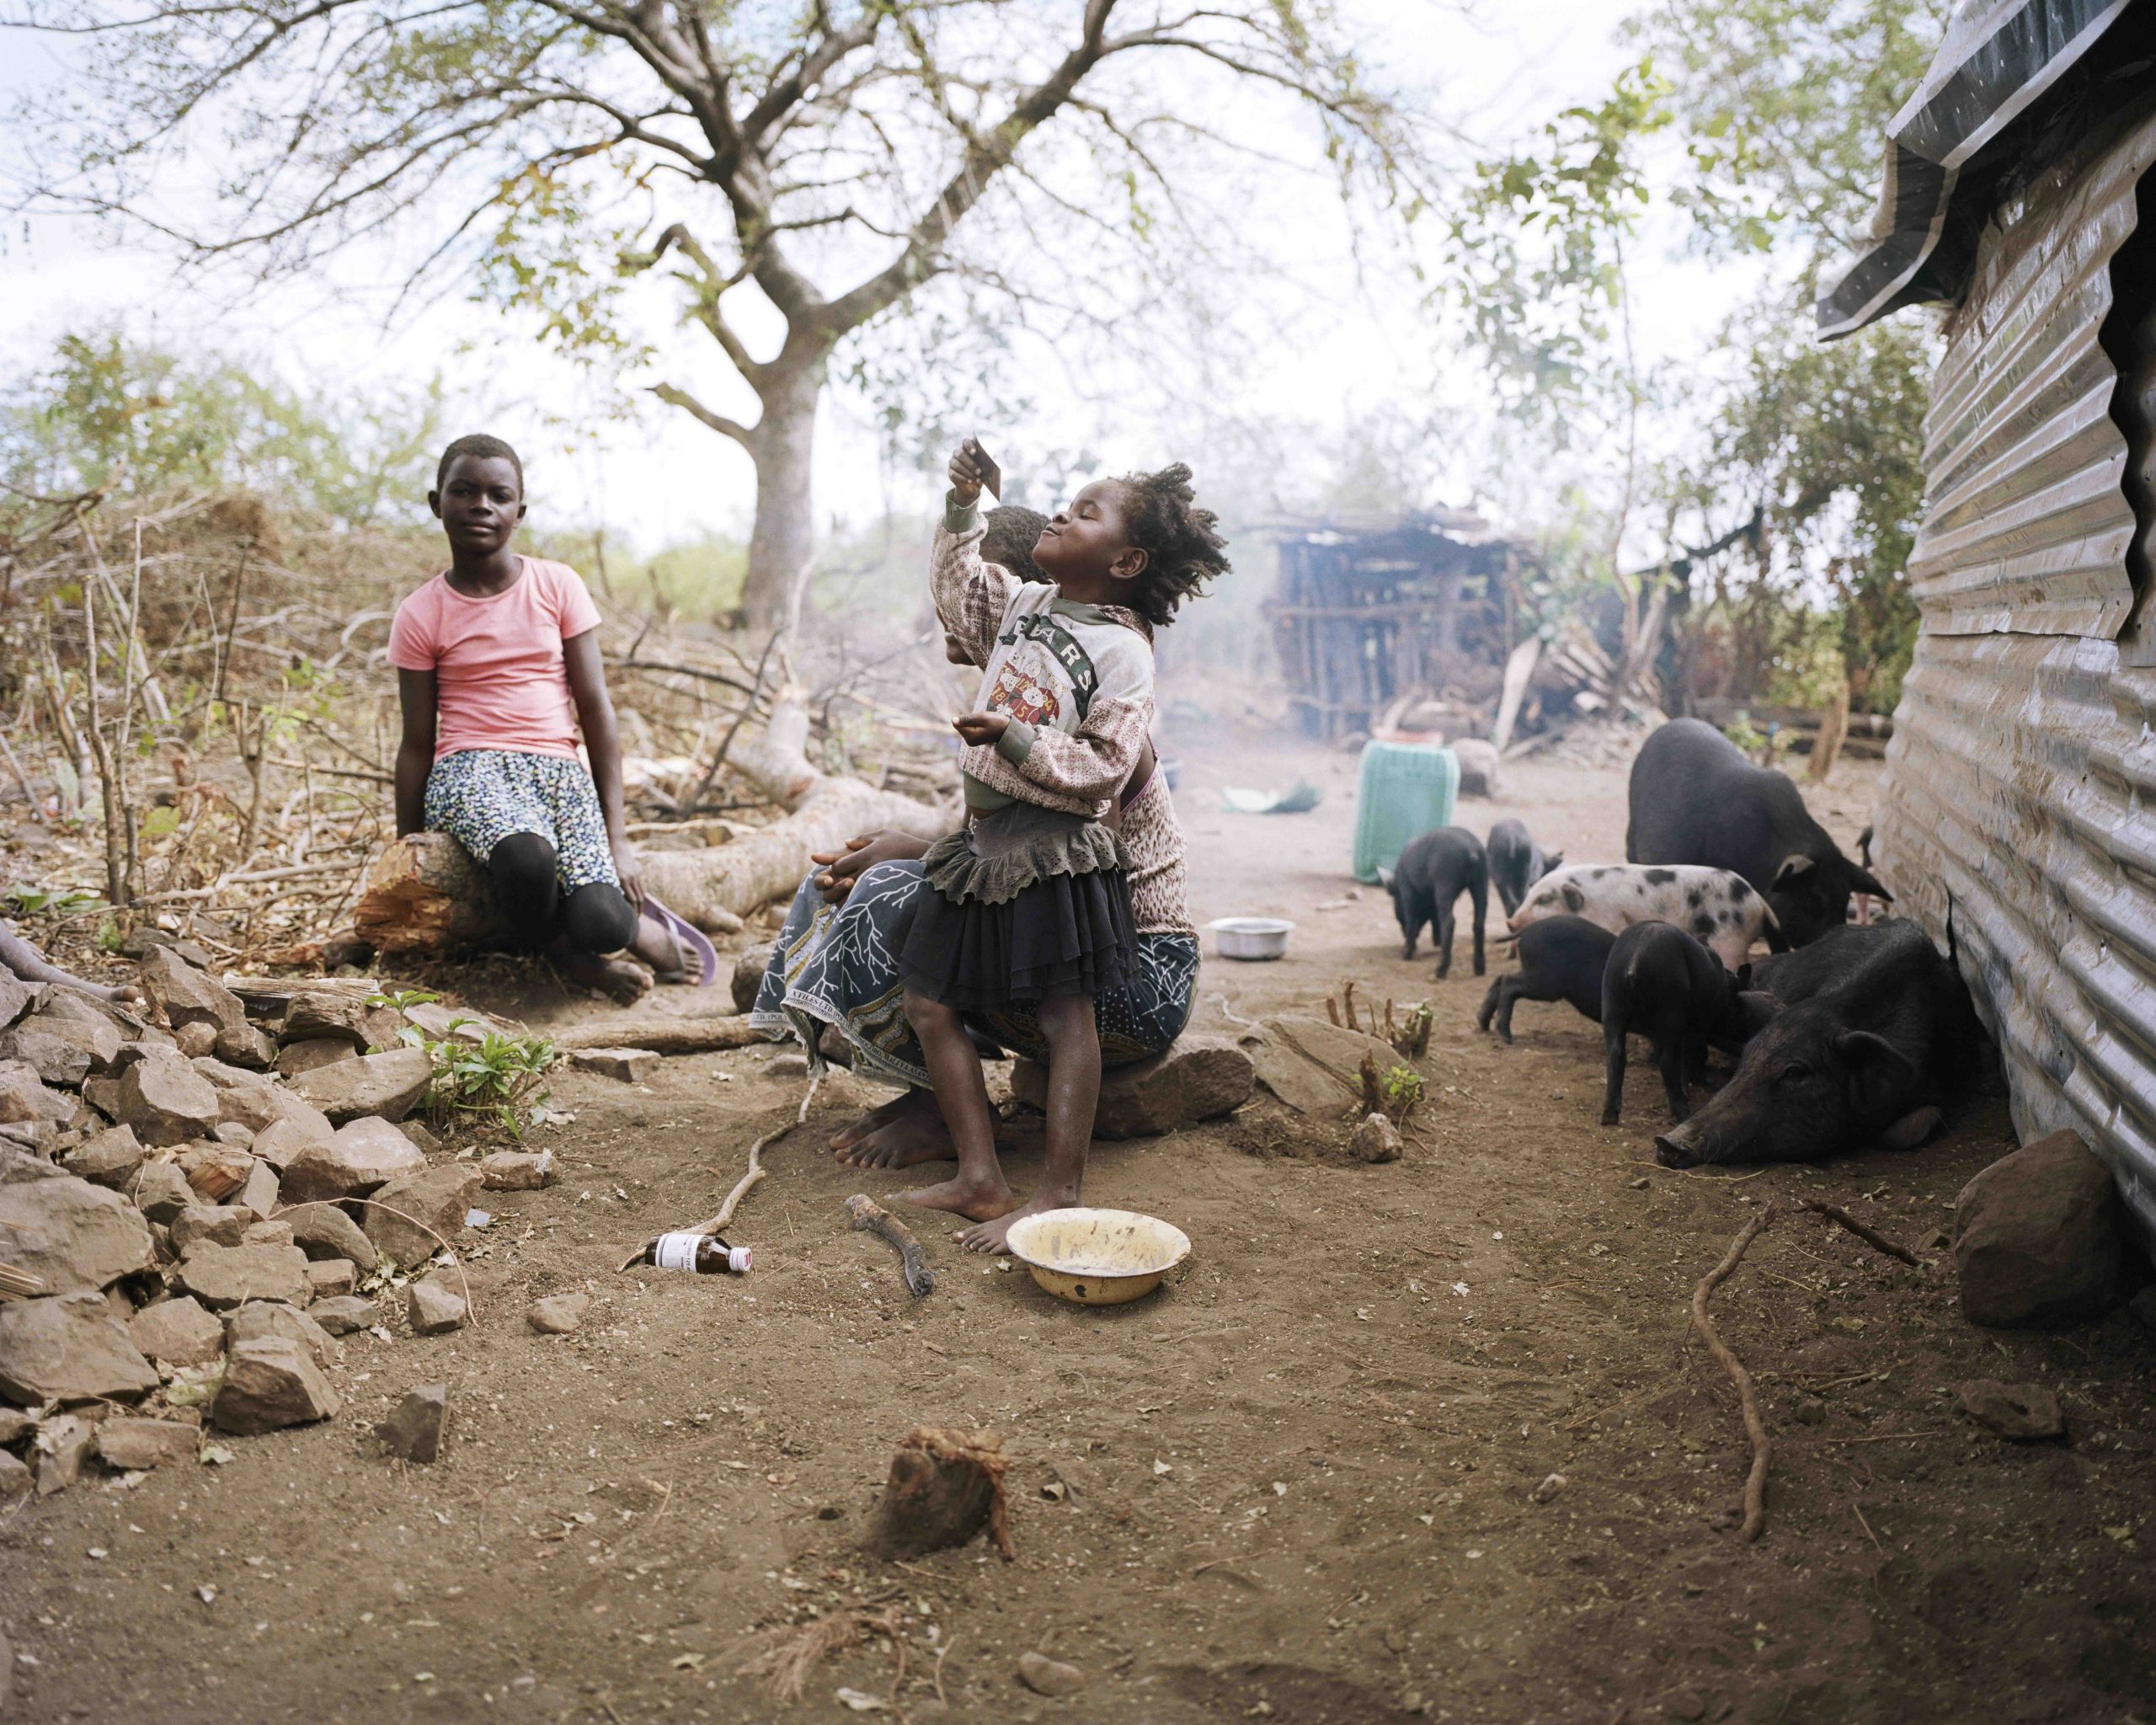 Children playing next to a shelter in Mwalija village in Malawi